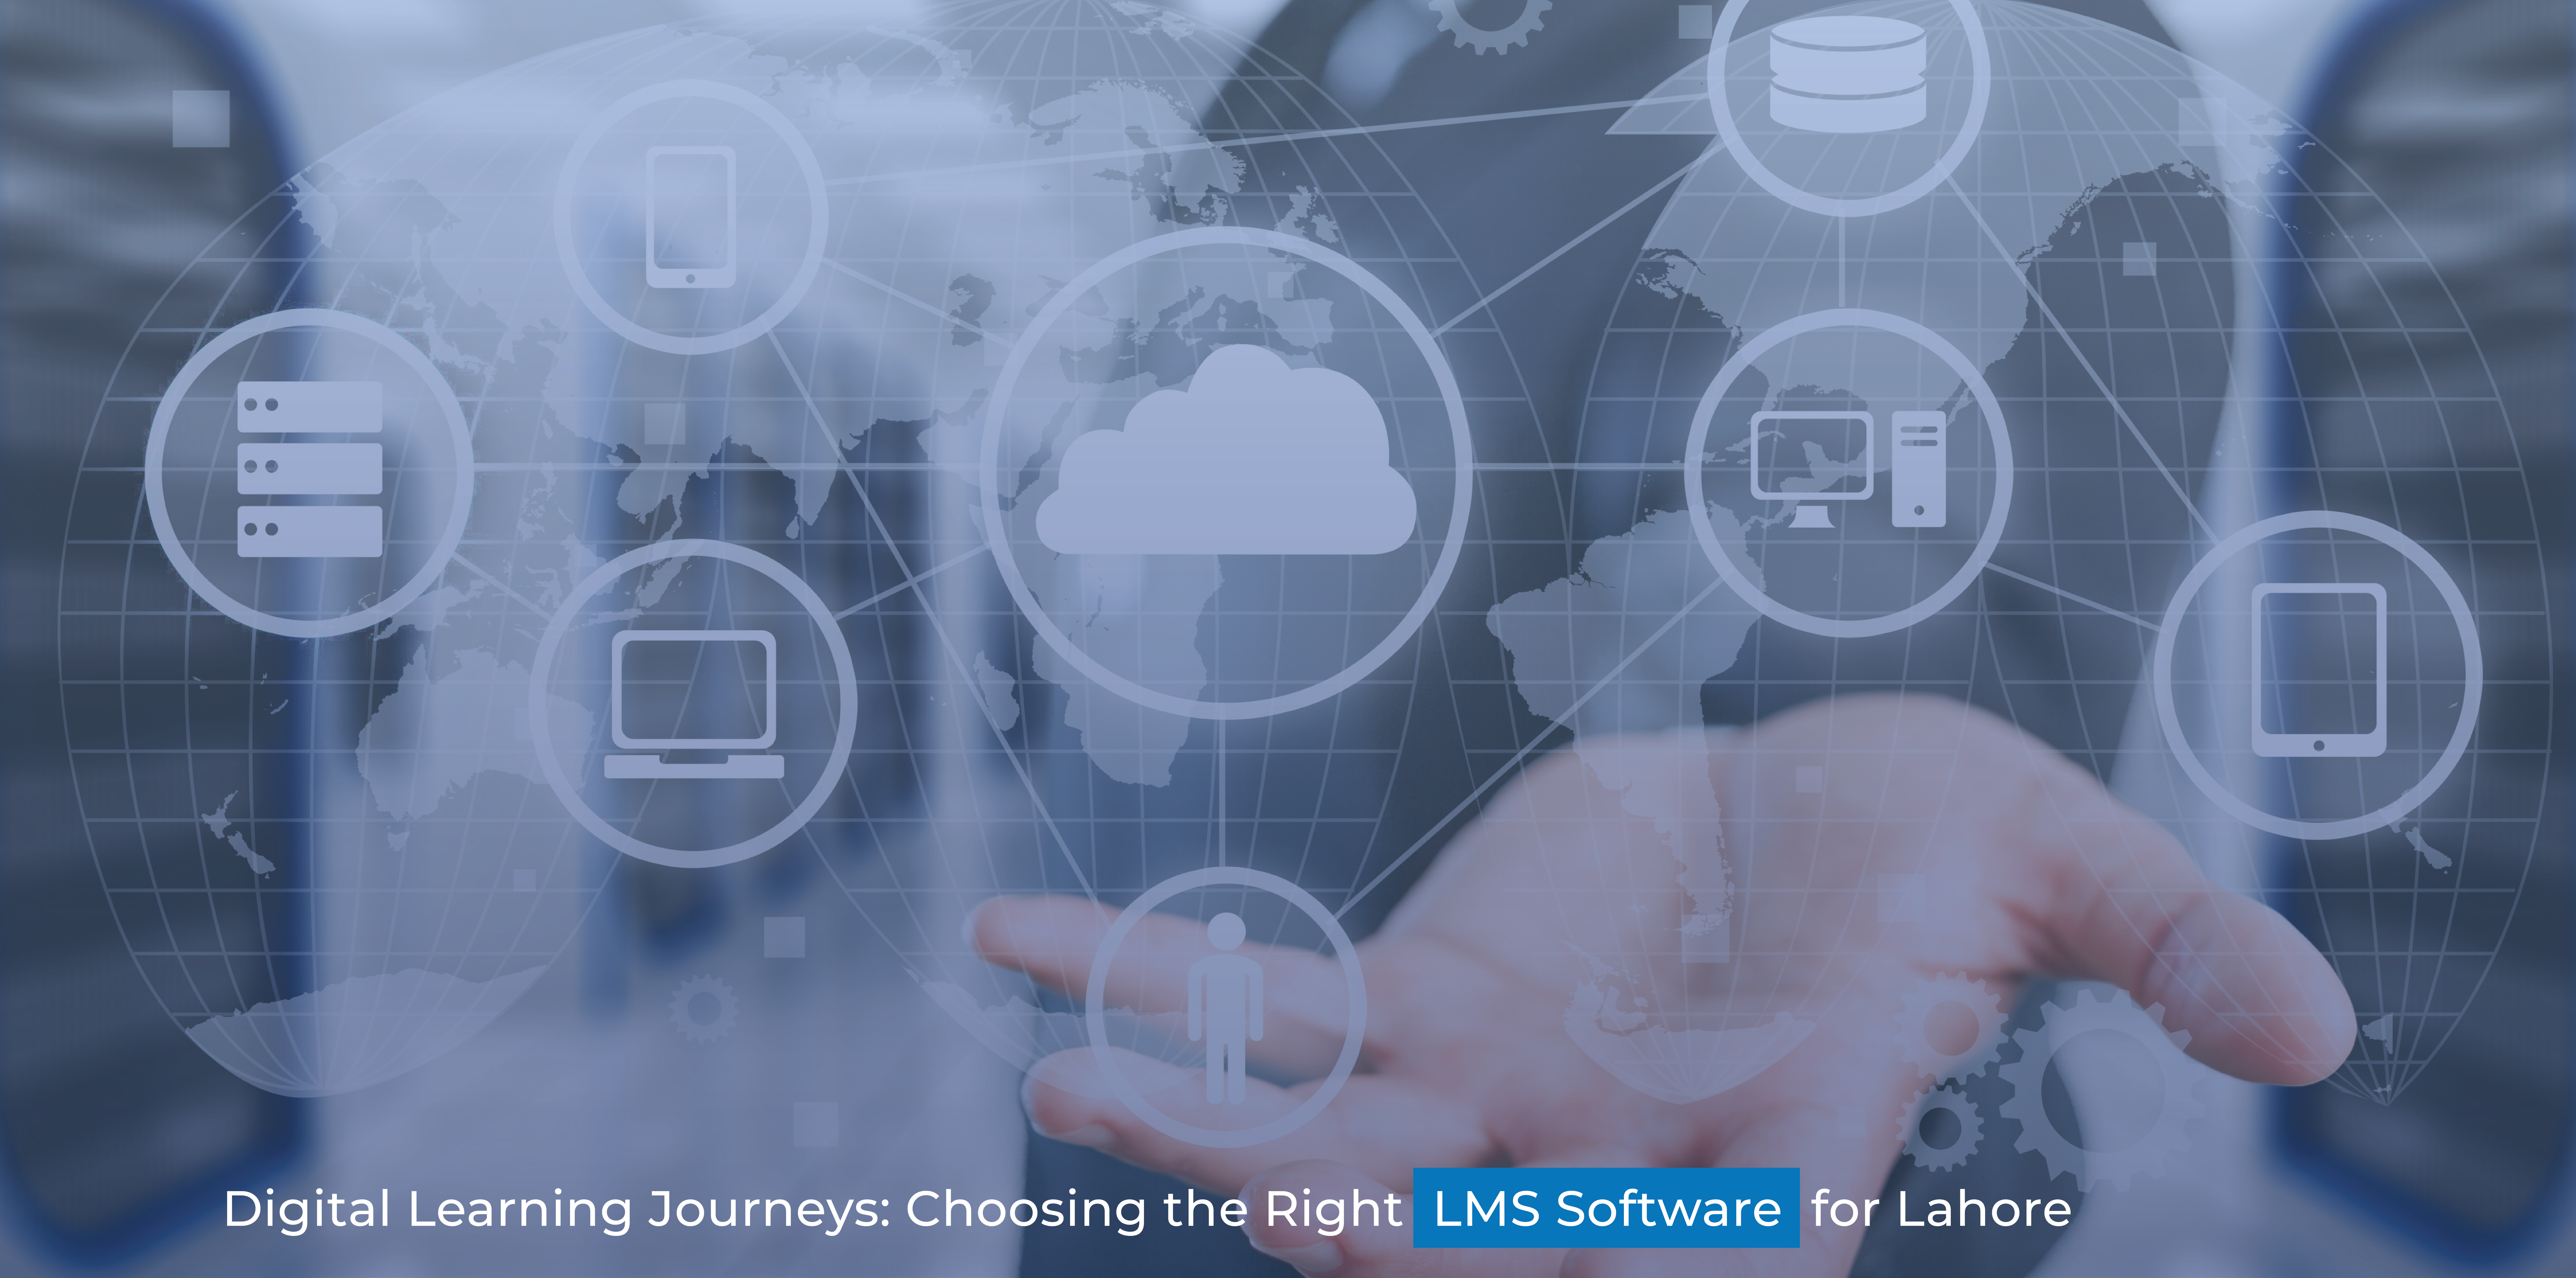 Digital Learning Journeys: Choosing the Right LMS Software for Lahore